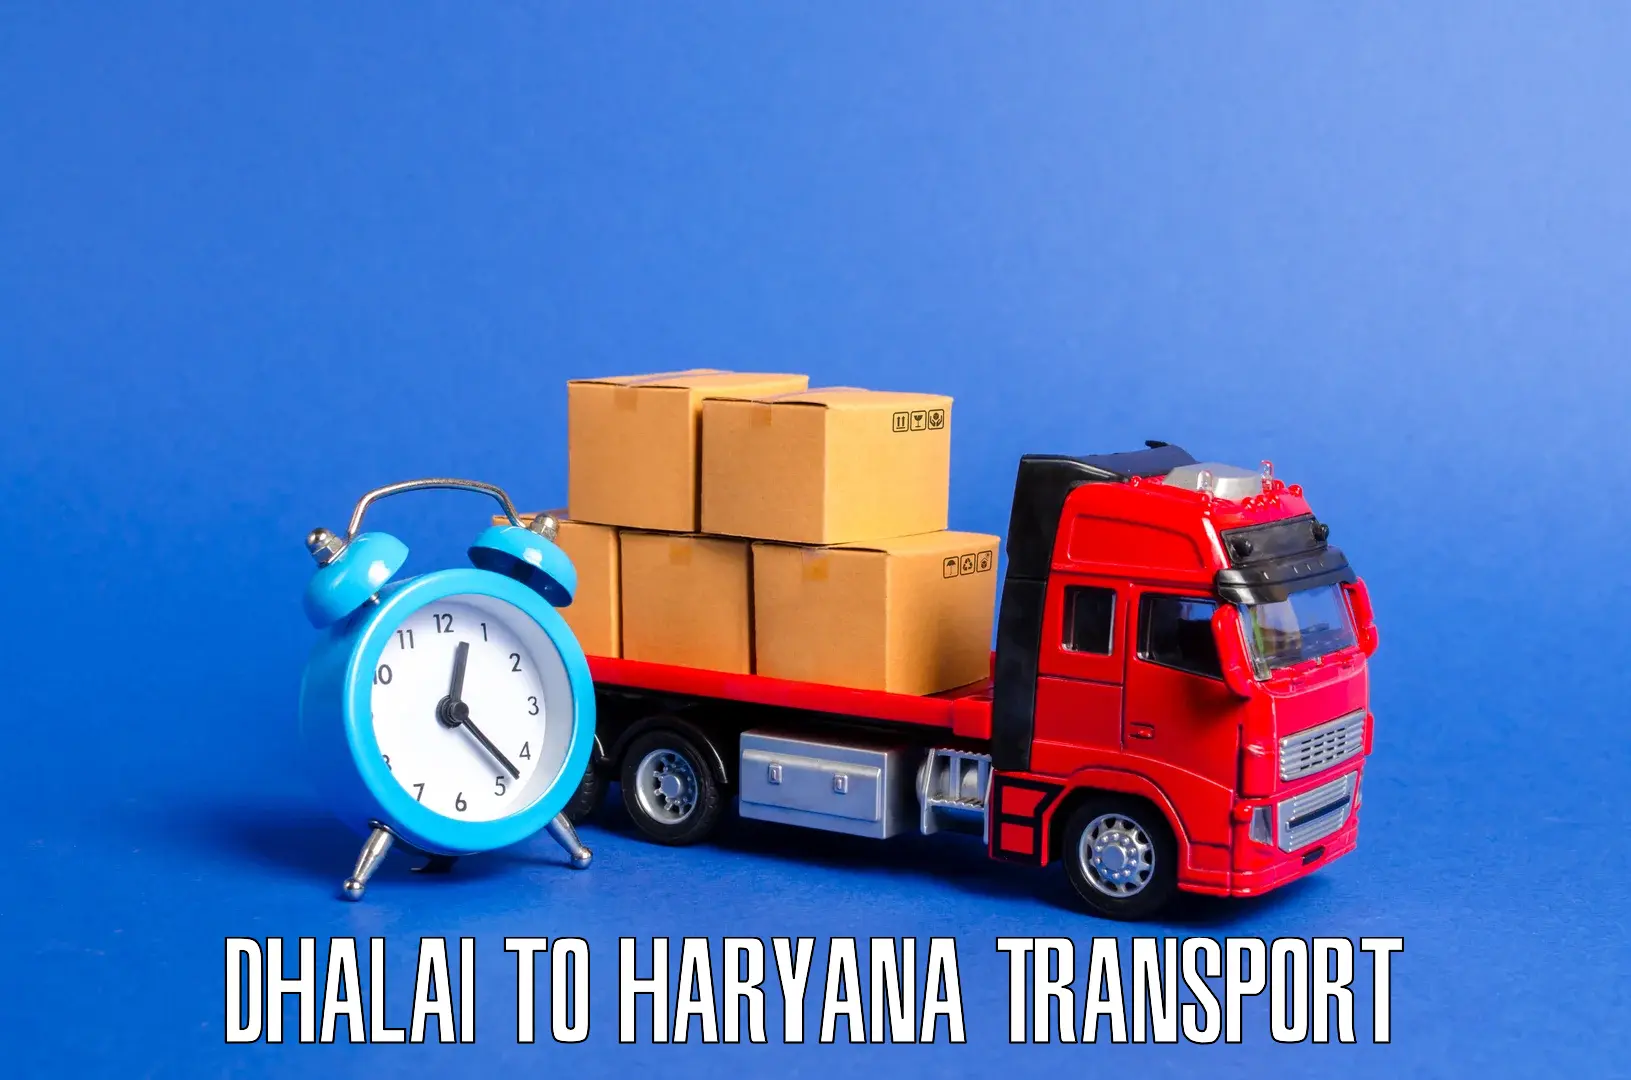 All India transport service Dhalai to Bahal